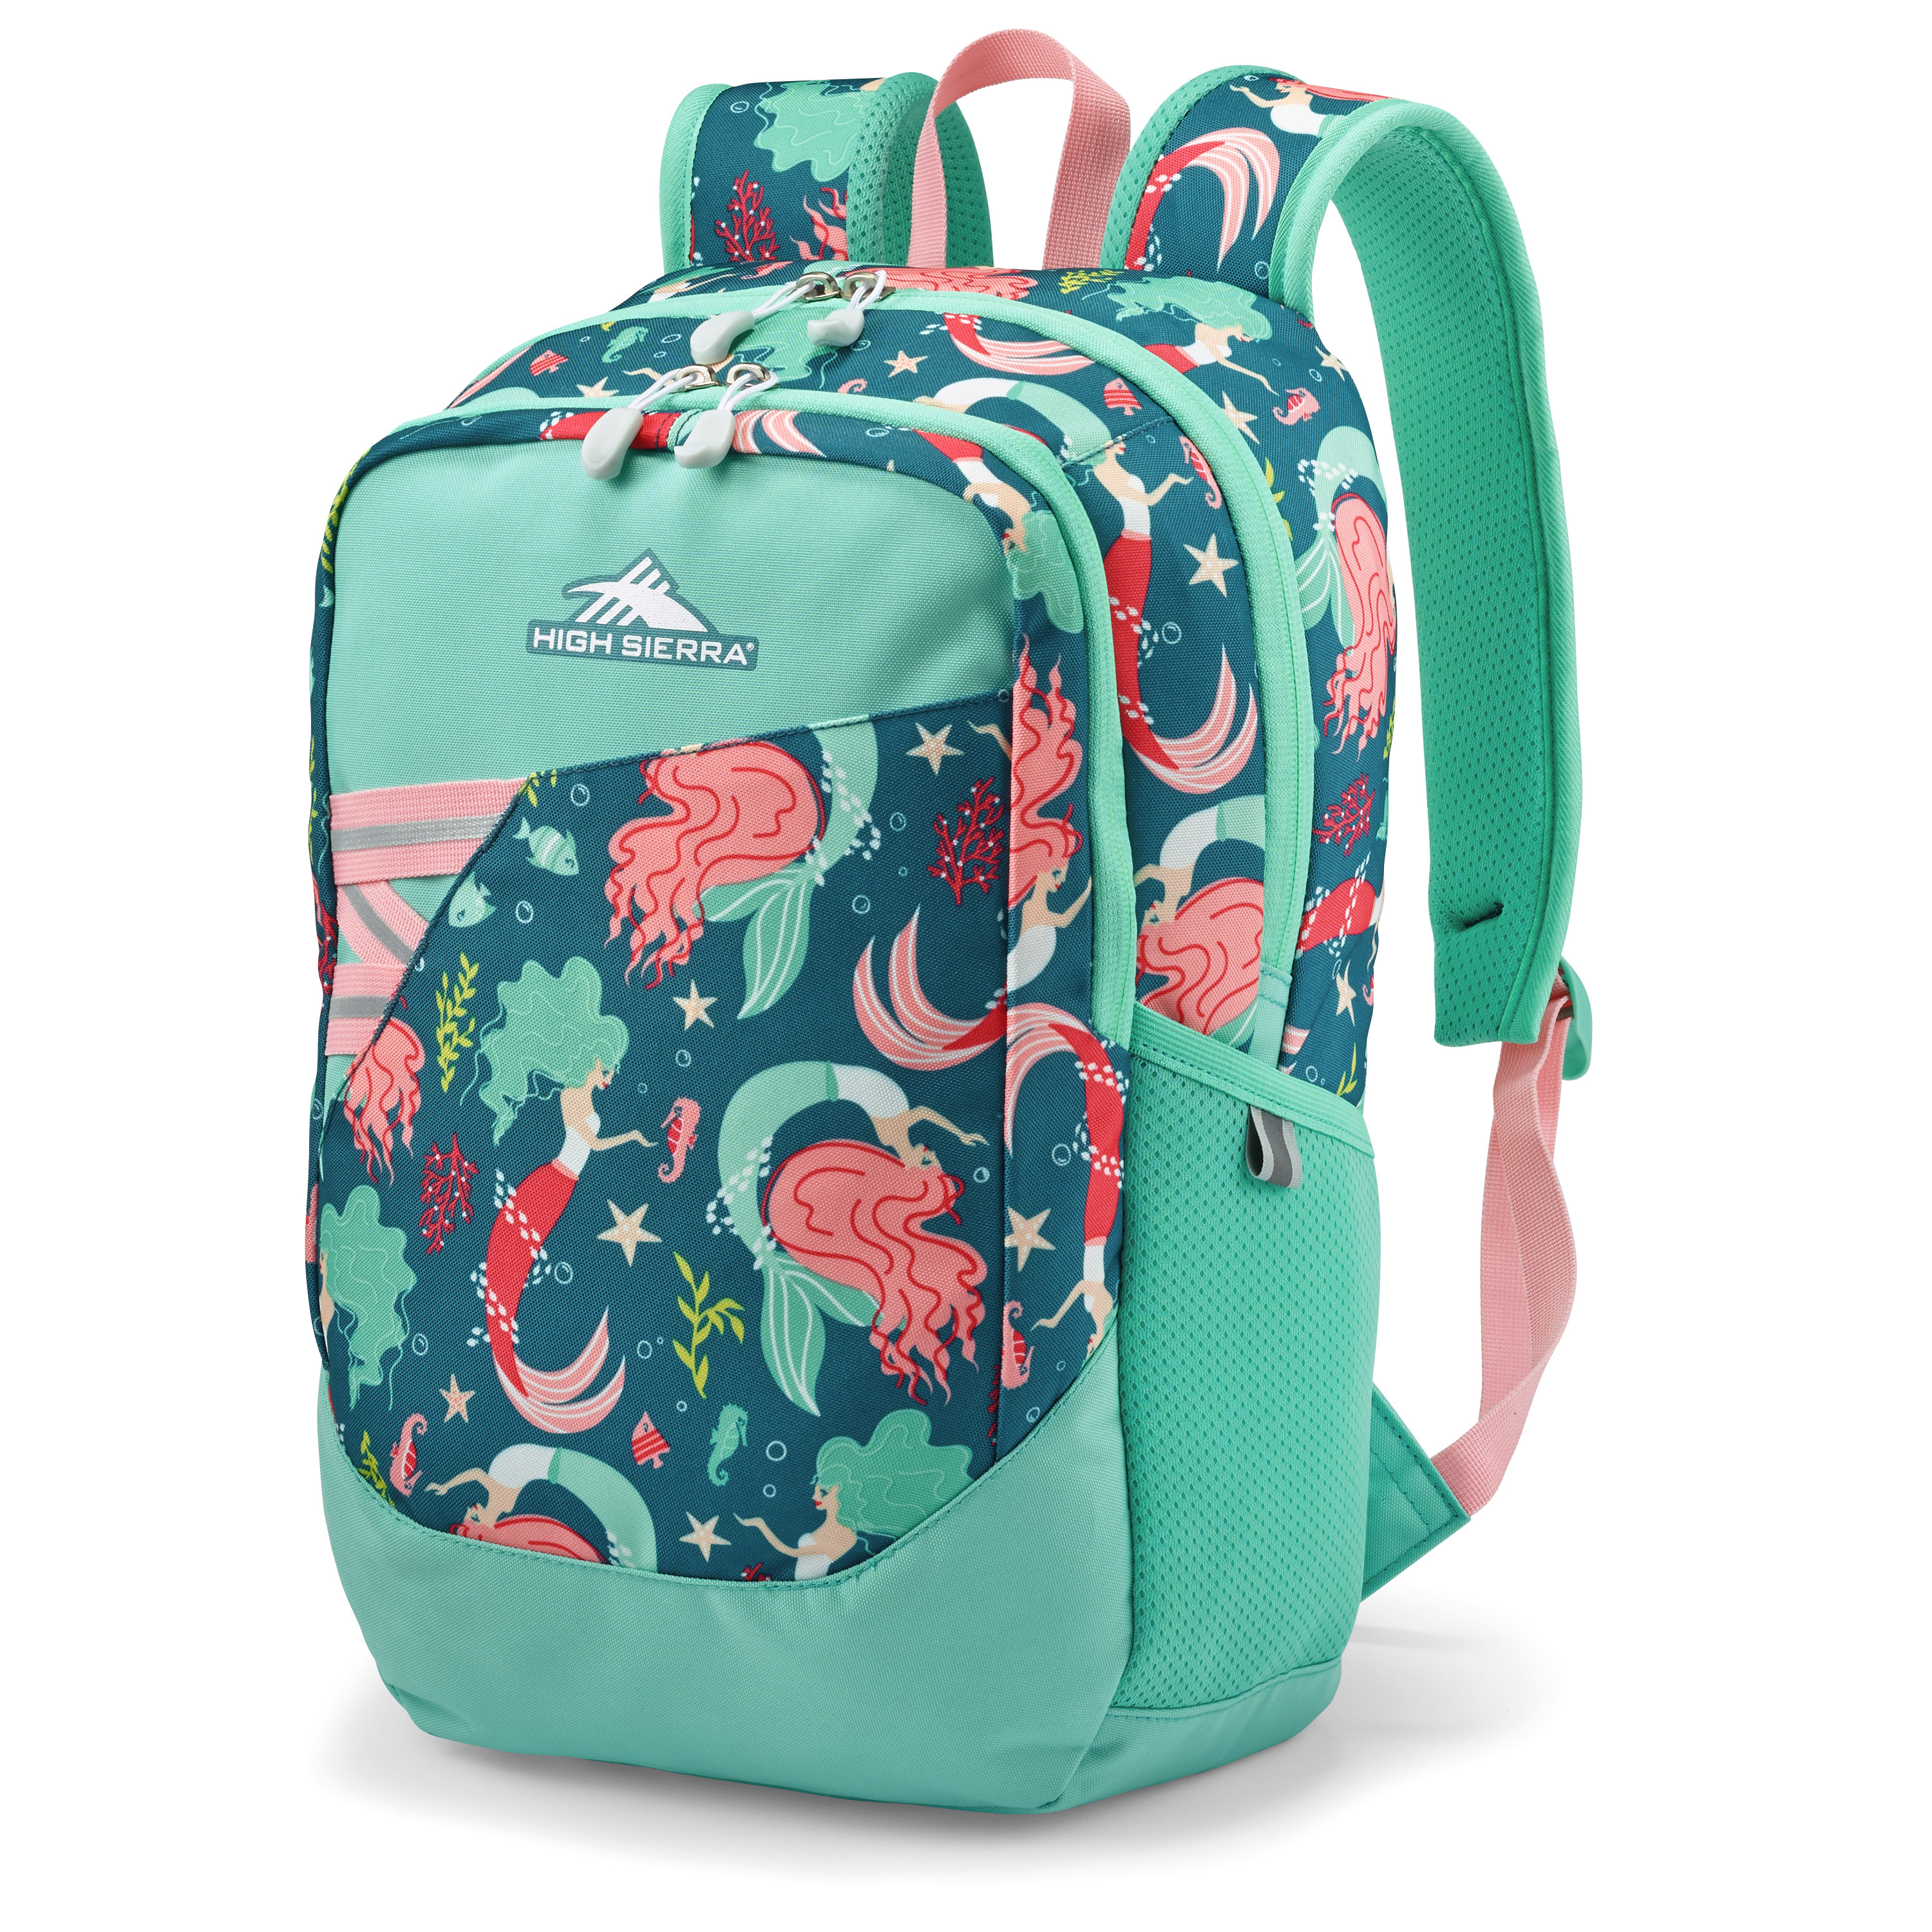 High Sierra Outburst Backpack - Space